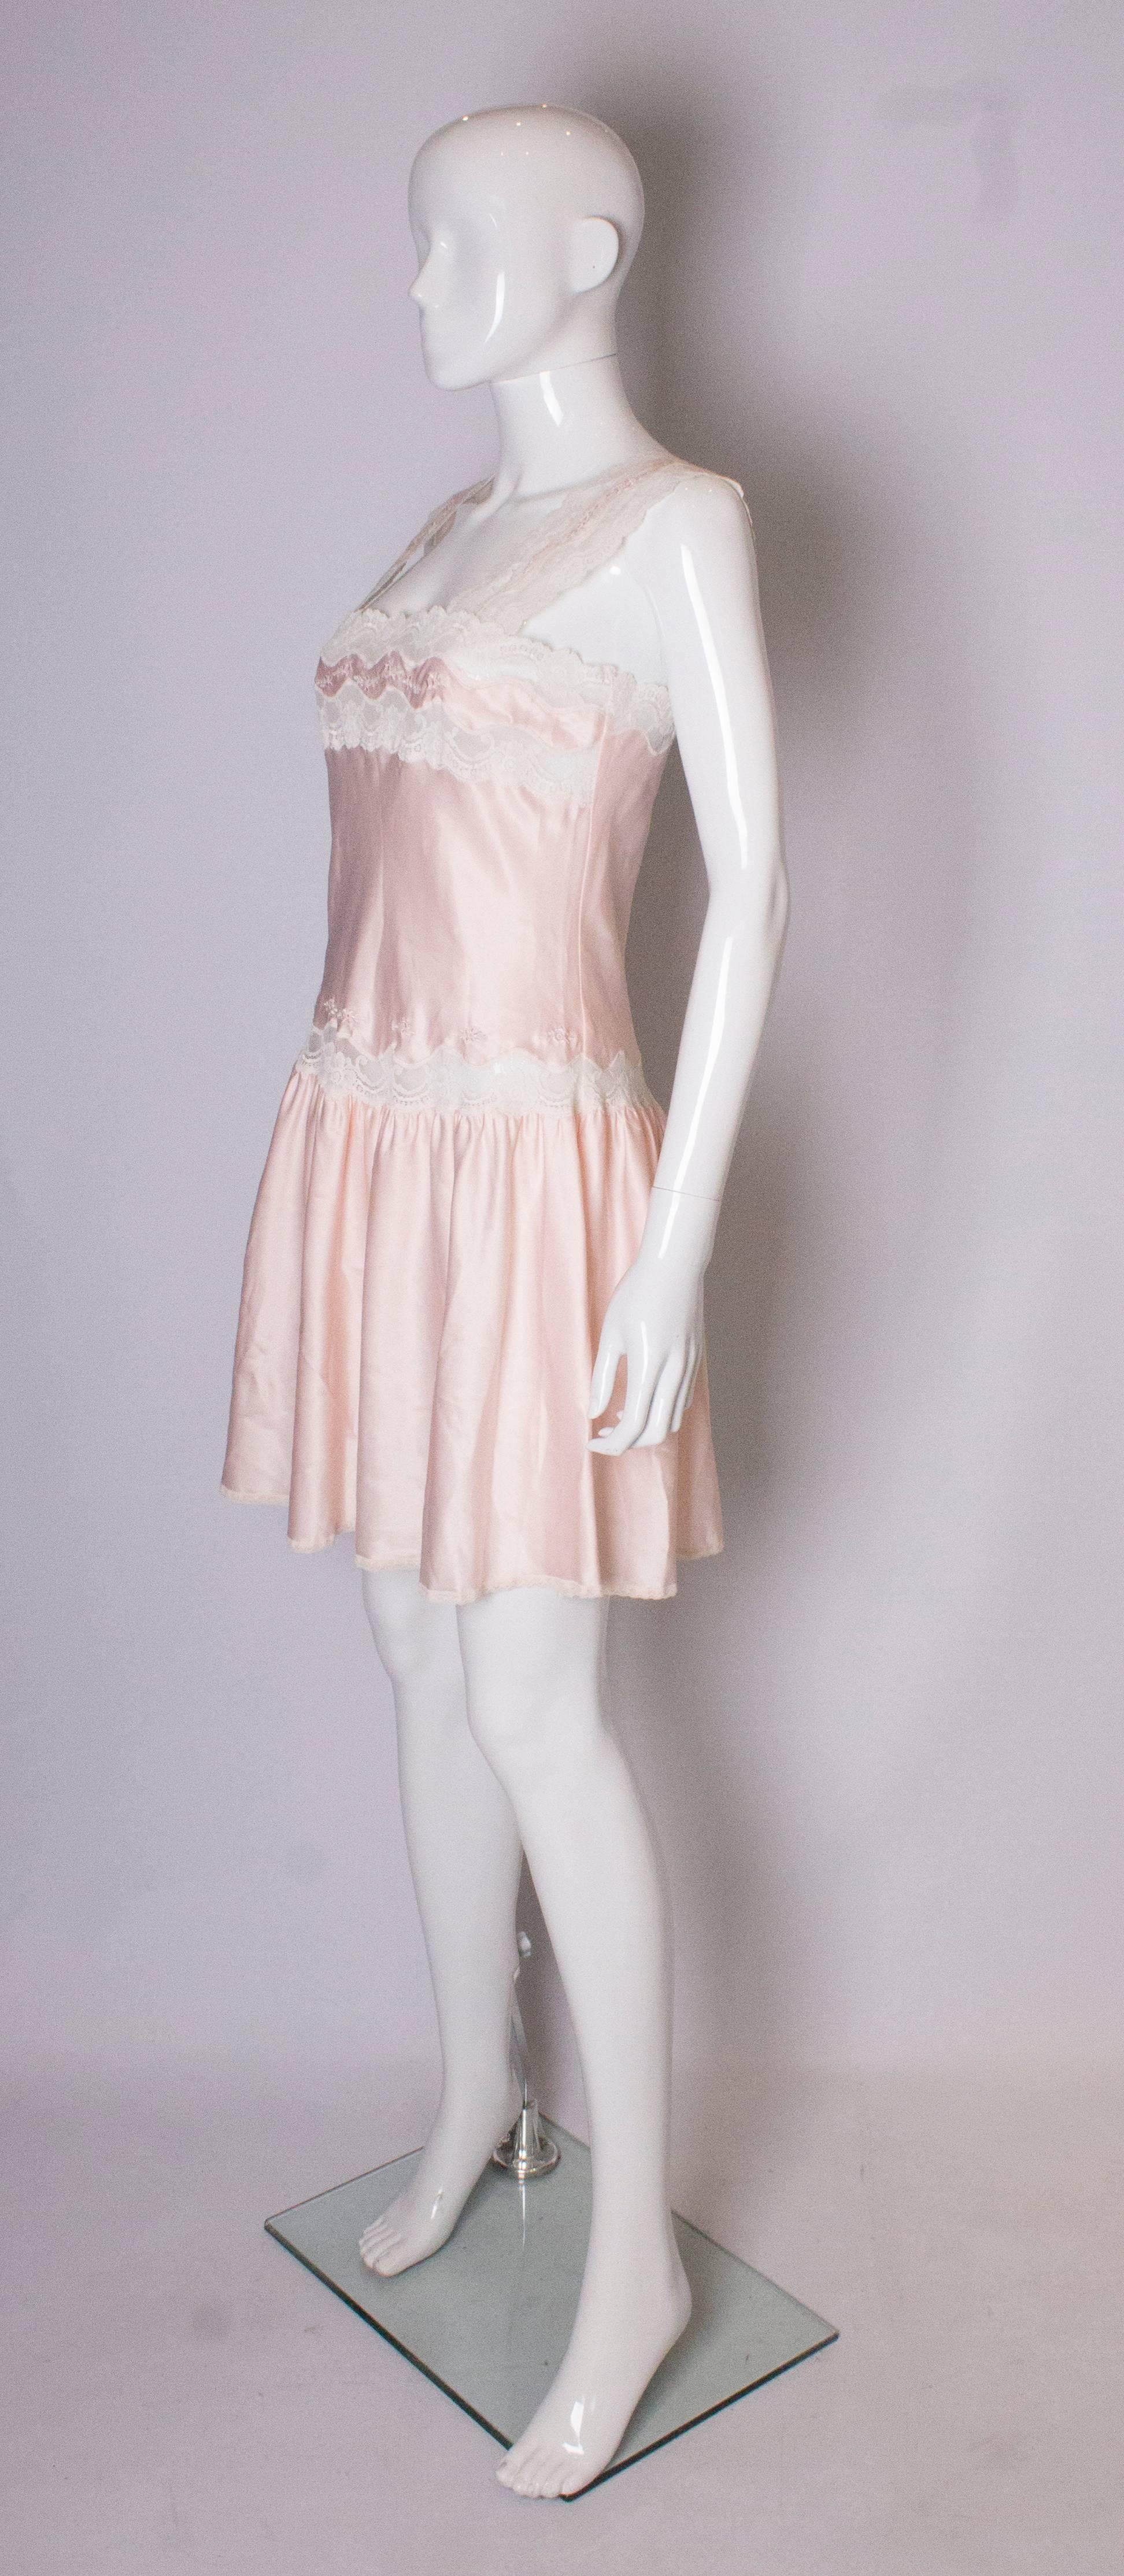 Beige Vintage Pink Nightdress /Dress with Lace Detail